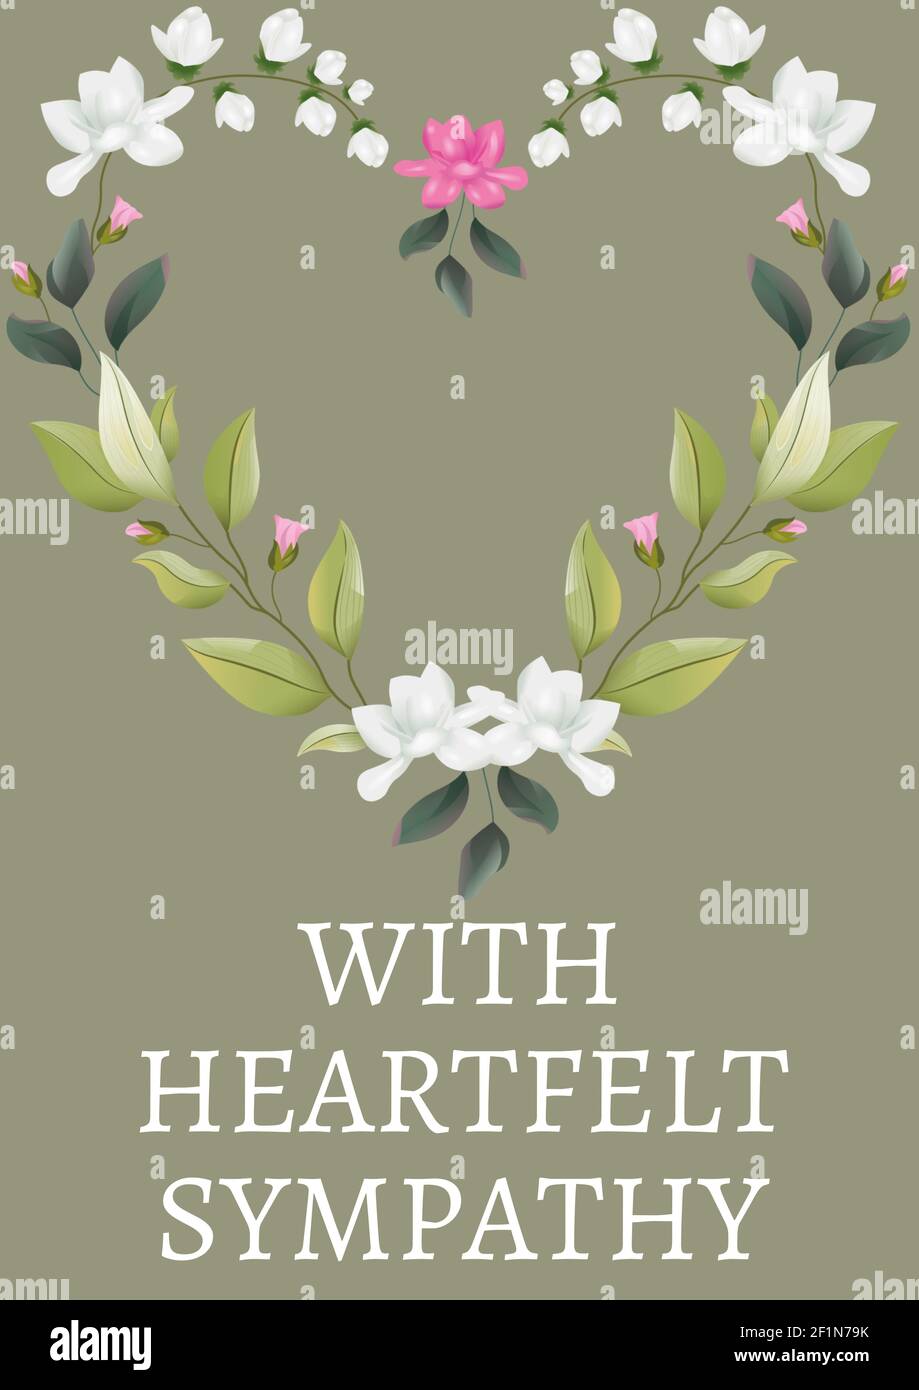 With heartfelt sympathy text with illustration of flowers on green background Stock Photo